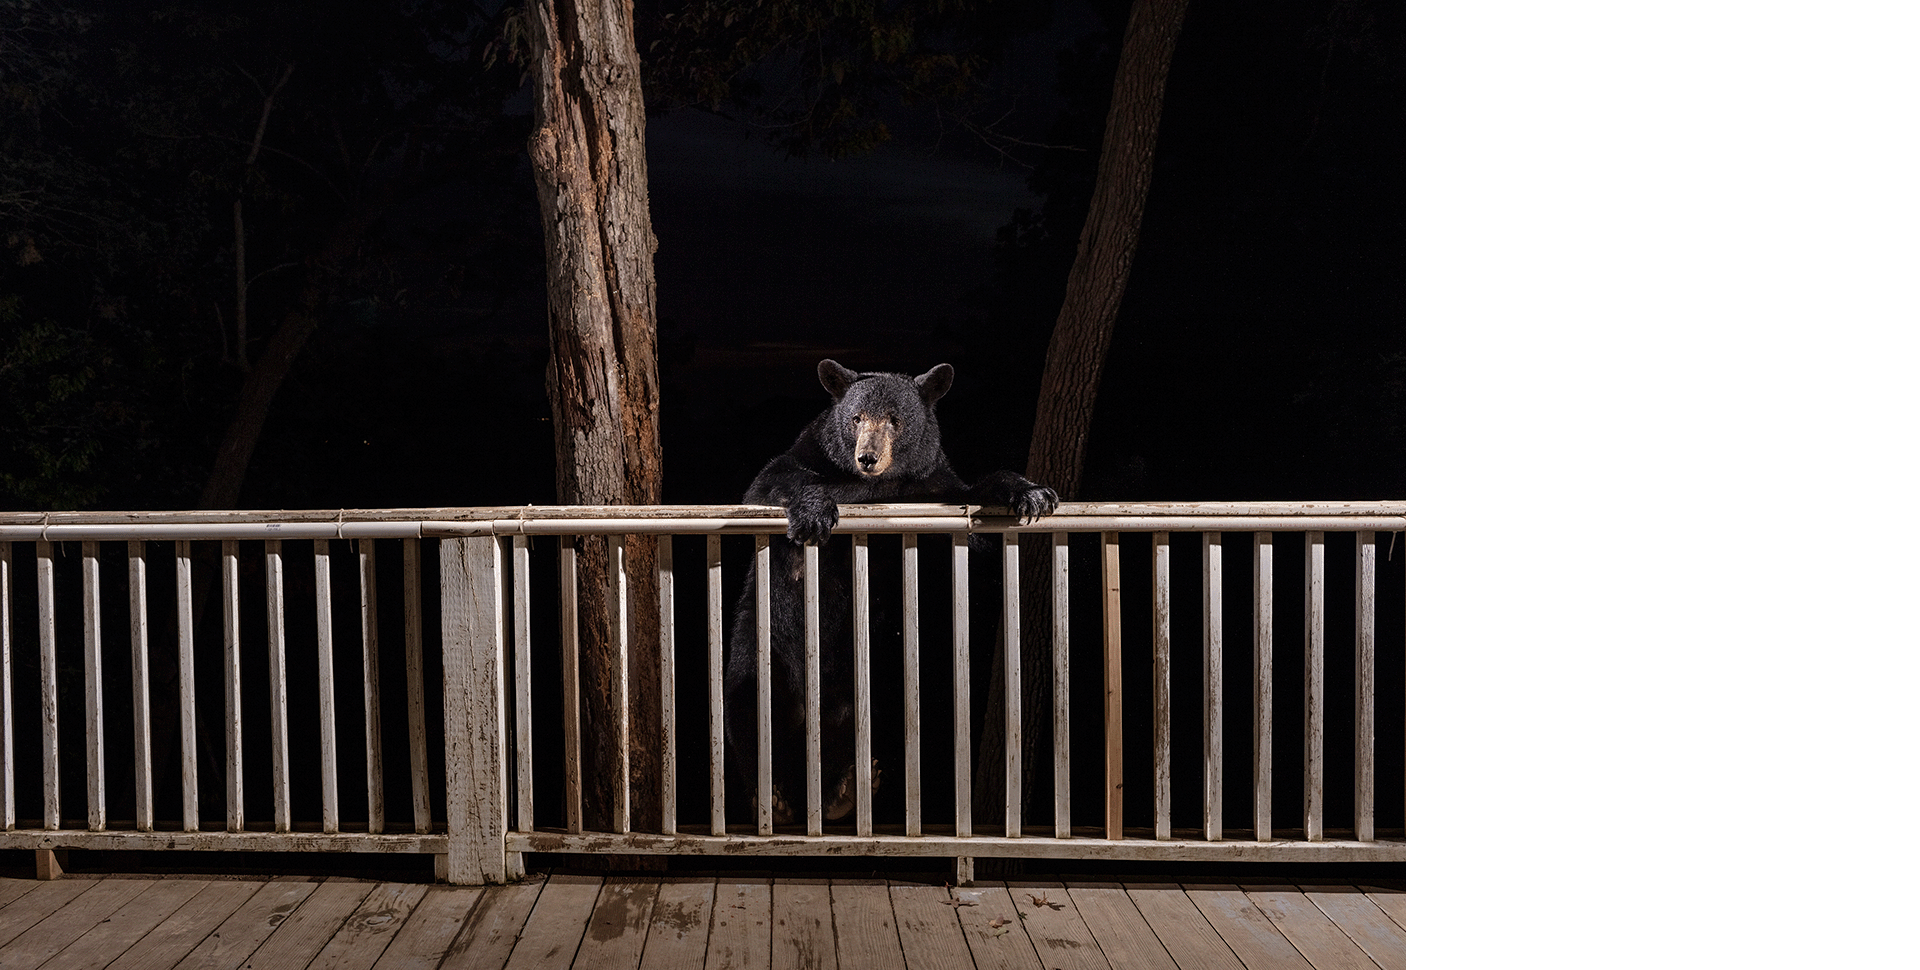 Black bear climbs onto a deck during the night. Photo by Corey Arnold